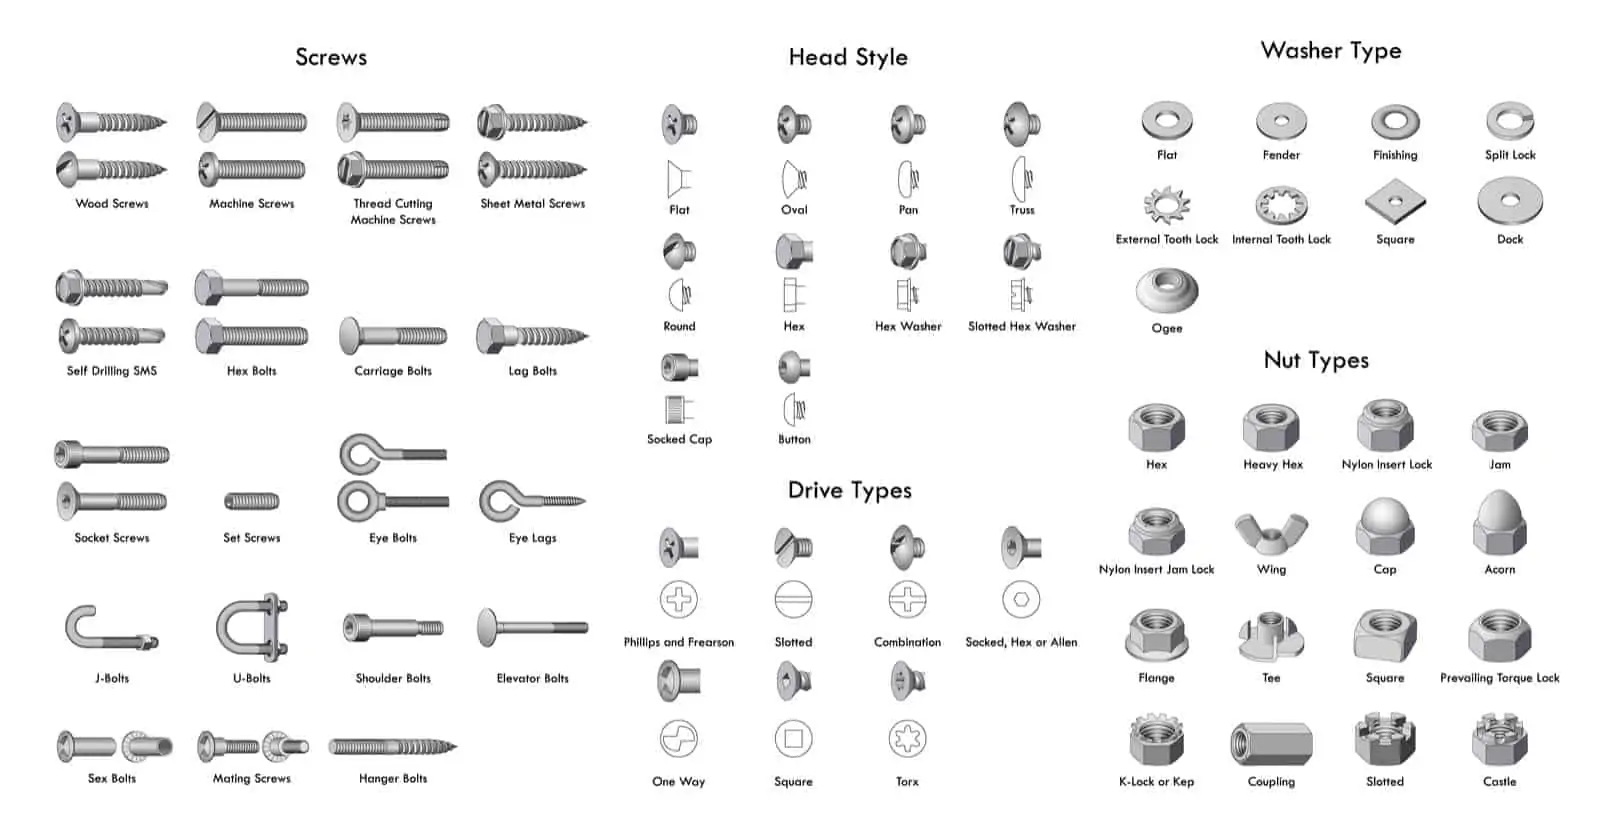 Screws and its types in furniture fittings